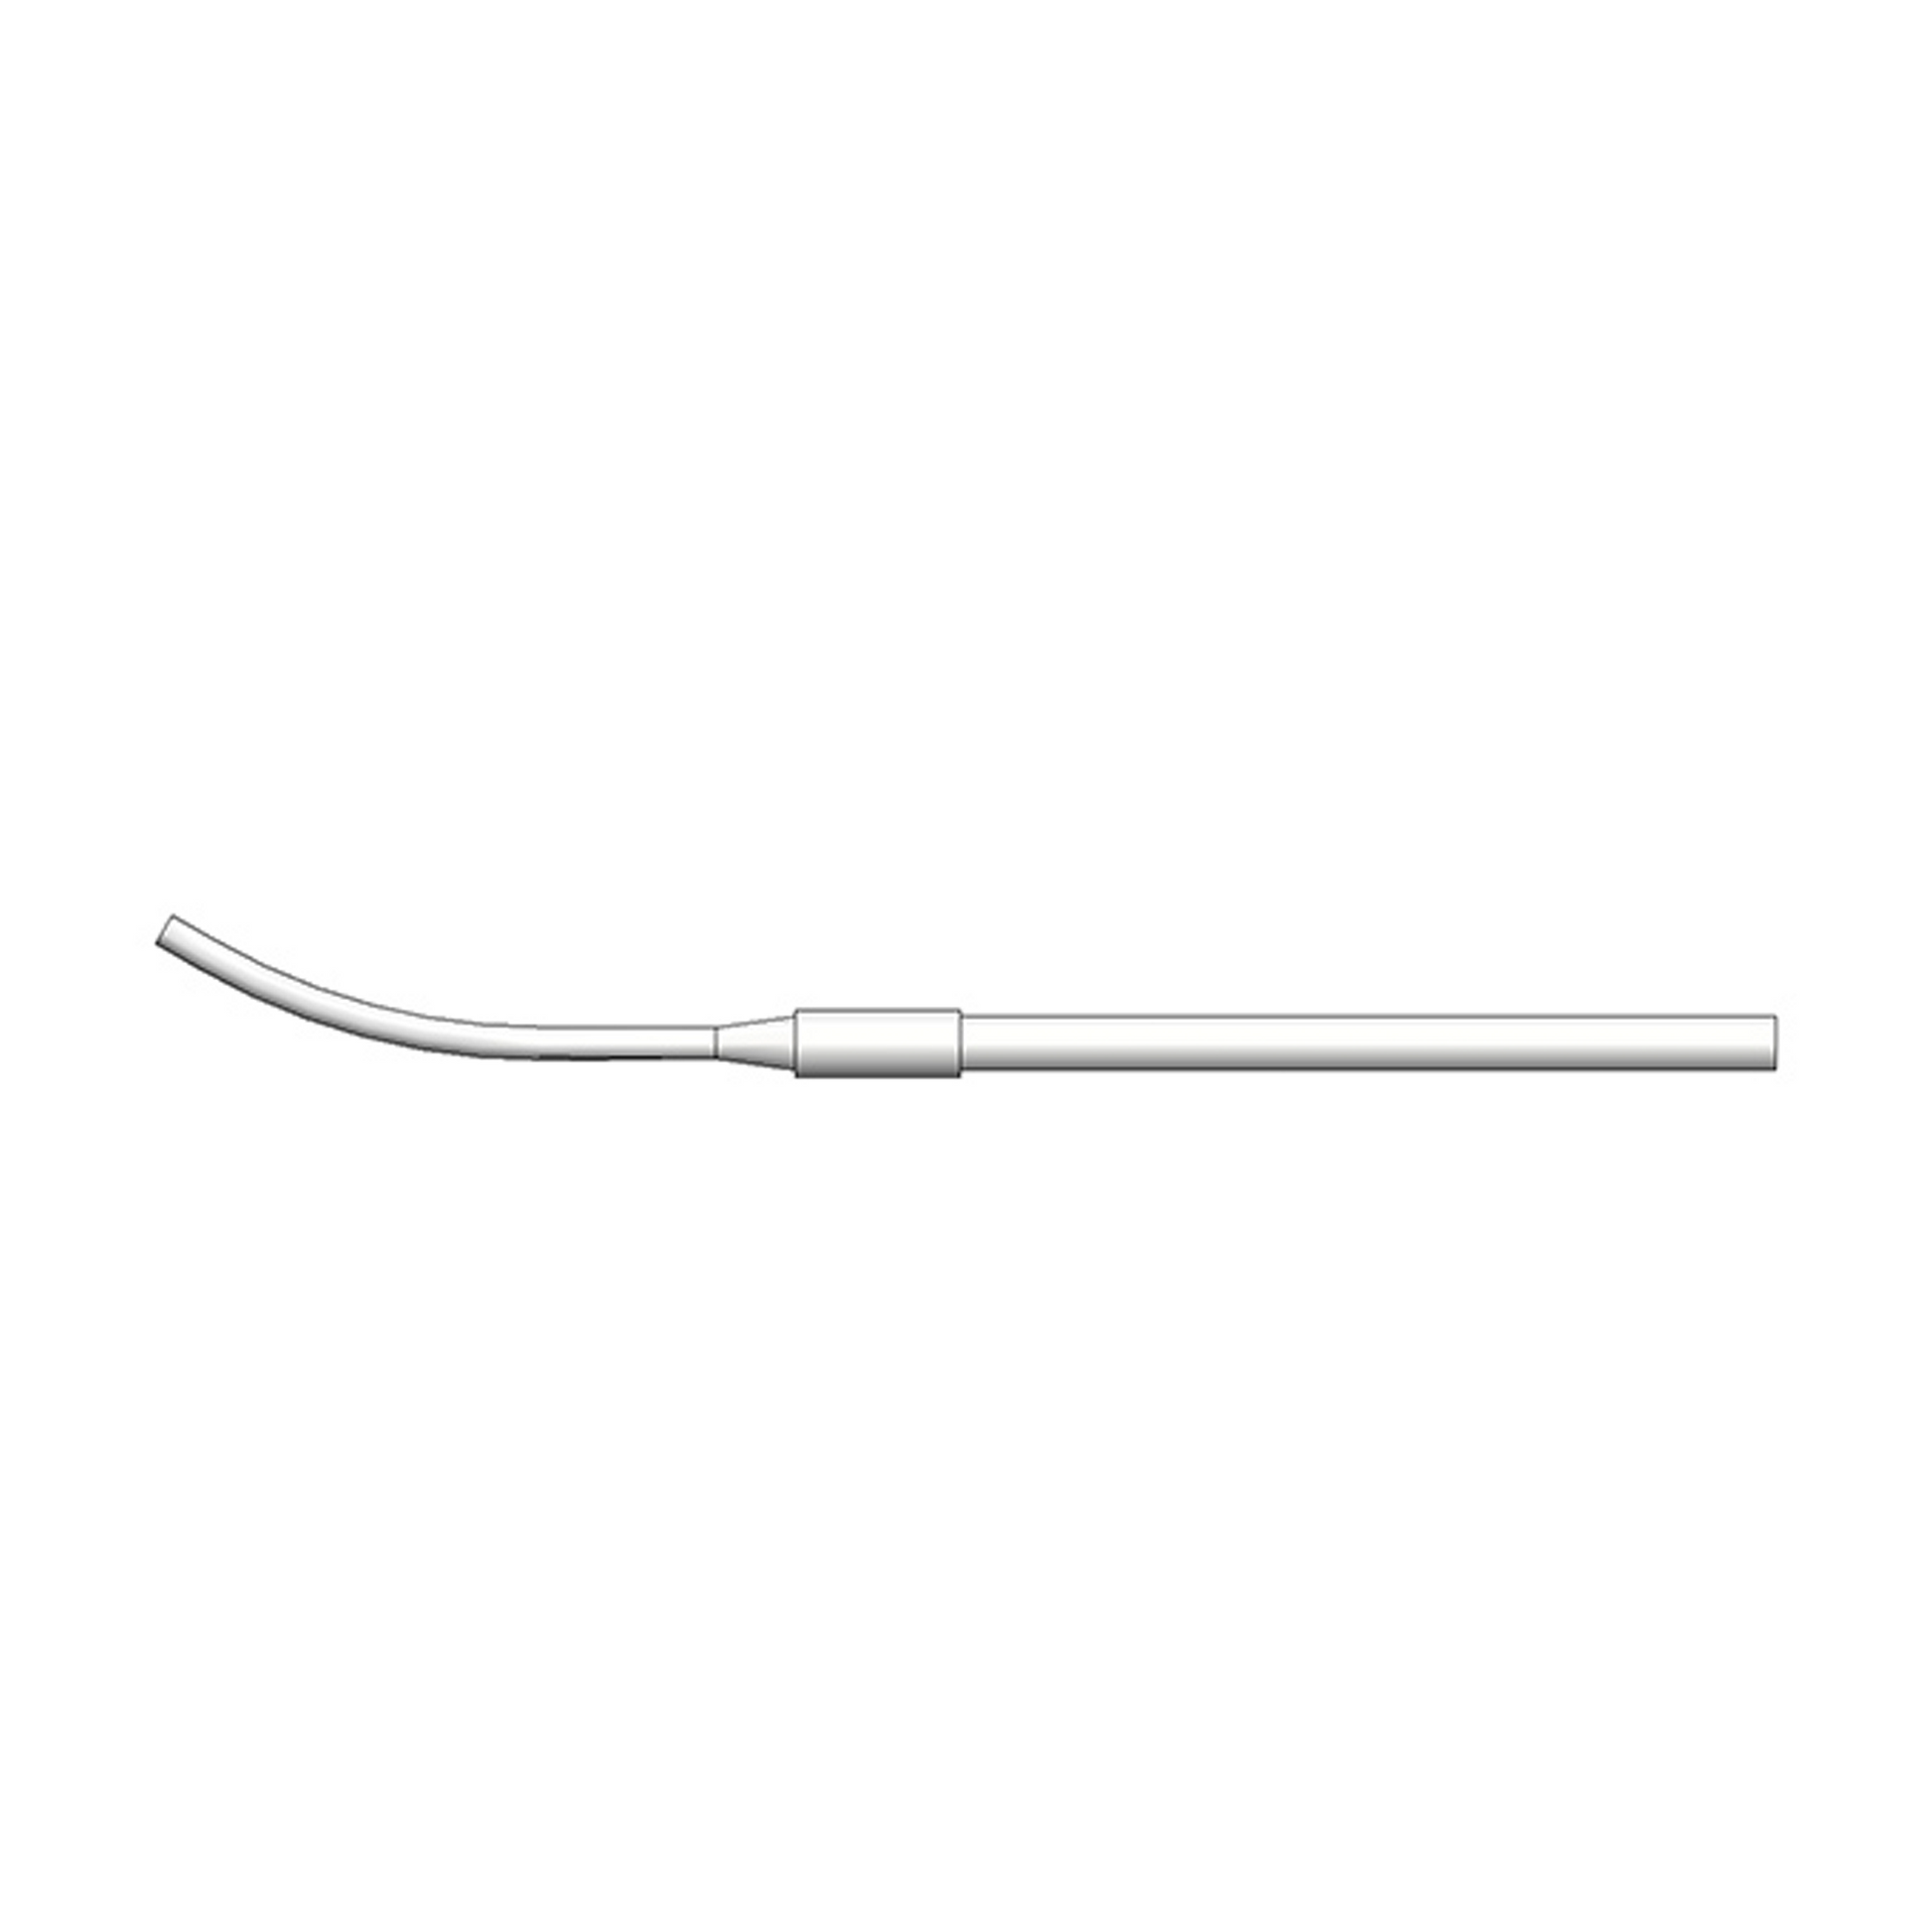 Hakko Products_ B5274 Feed pipe assembly 1.0mm_ Soldering Accessories_ Hakko Products